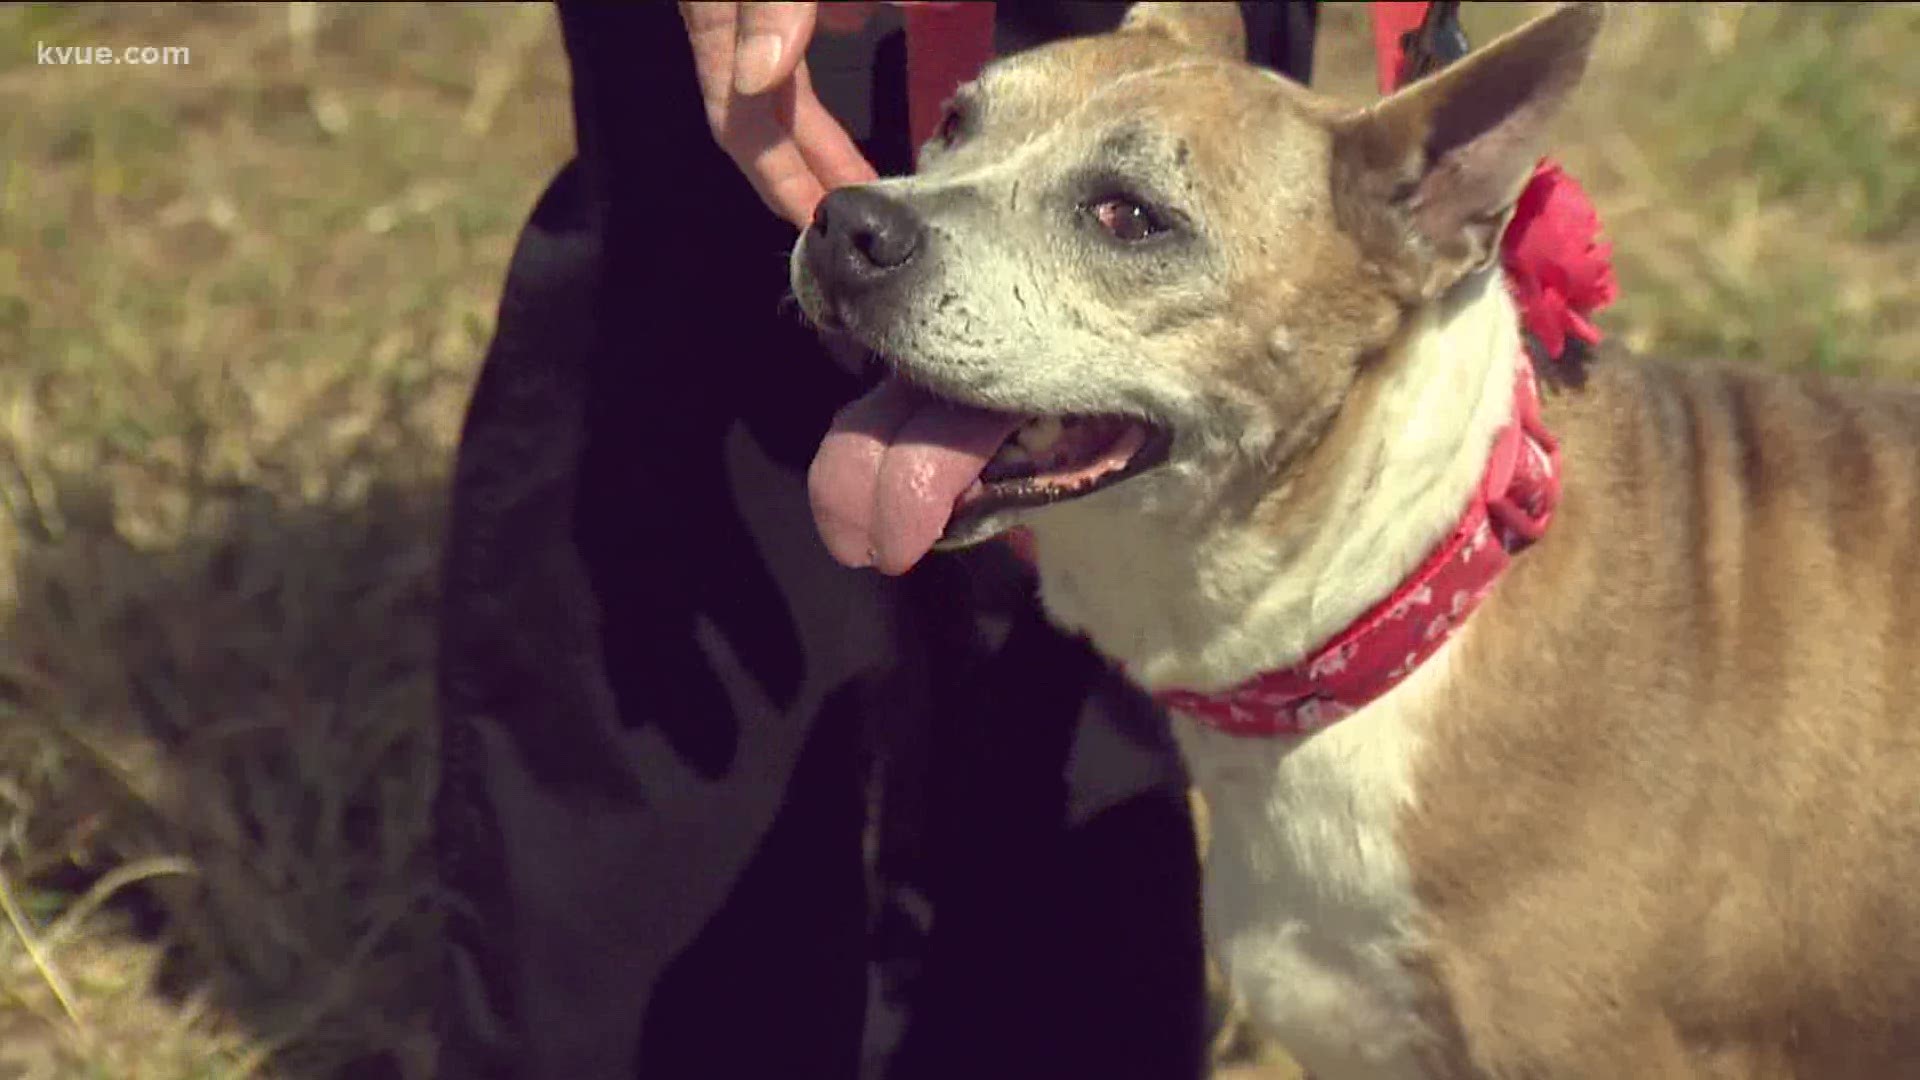 Emily Giangreco shows us how one Central Texas woman is creating something special for dogs deemed "unadoptable."